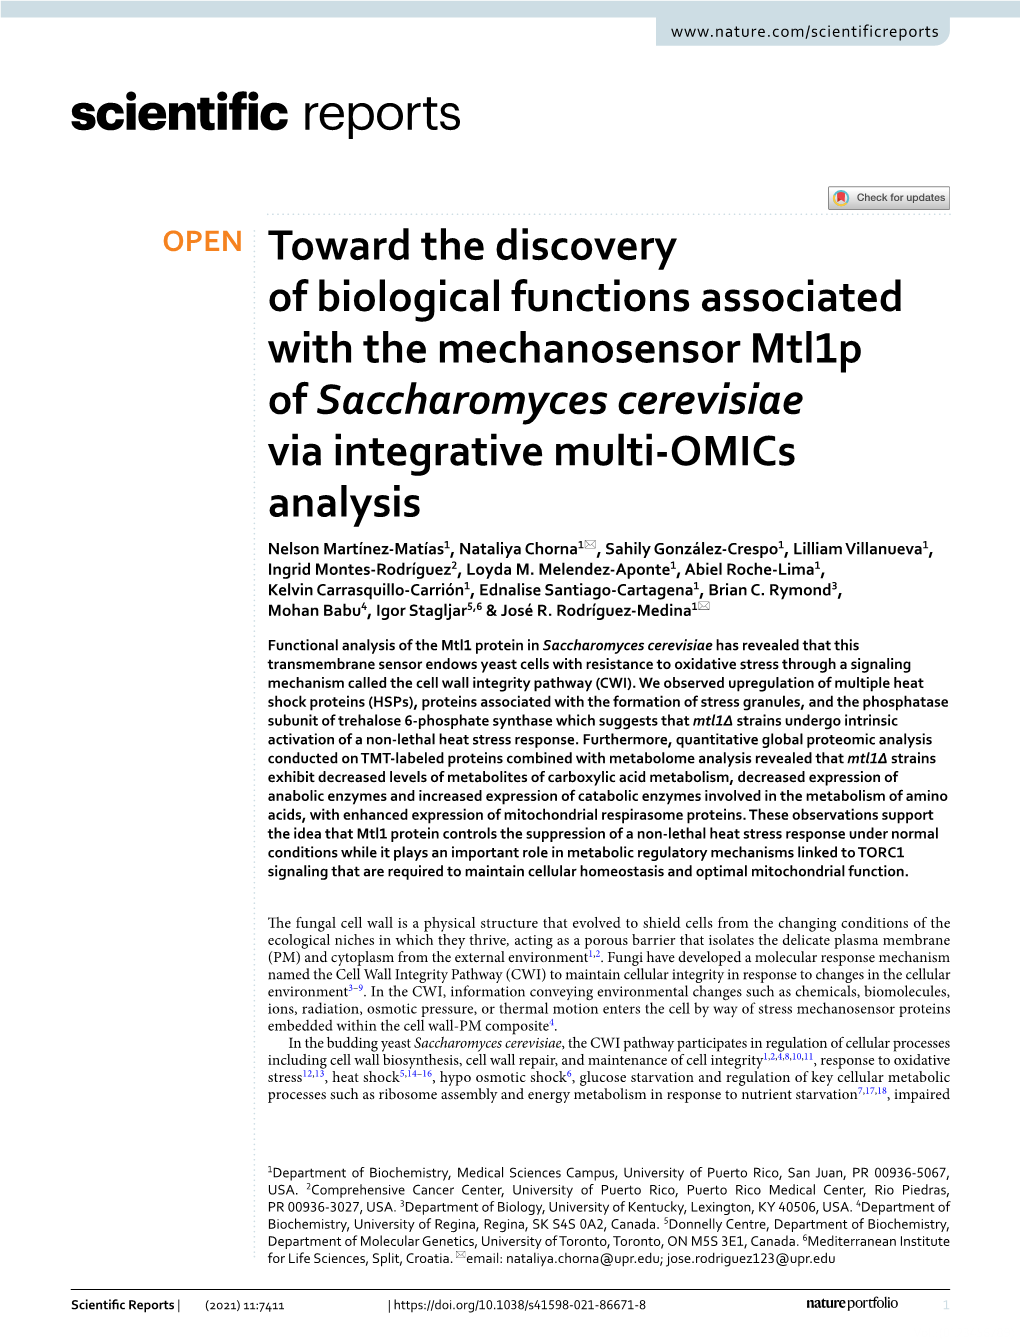 Toward the Discovery of Biological Functions Associated with the Mechanosensor Mtl1p of Saccharomyces Cerevisiae Via Integrative